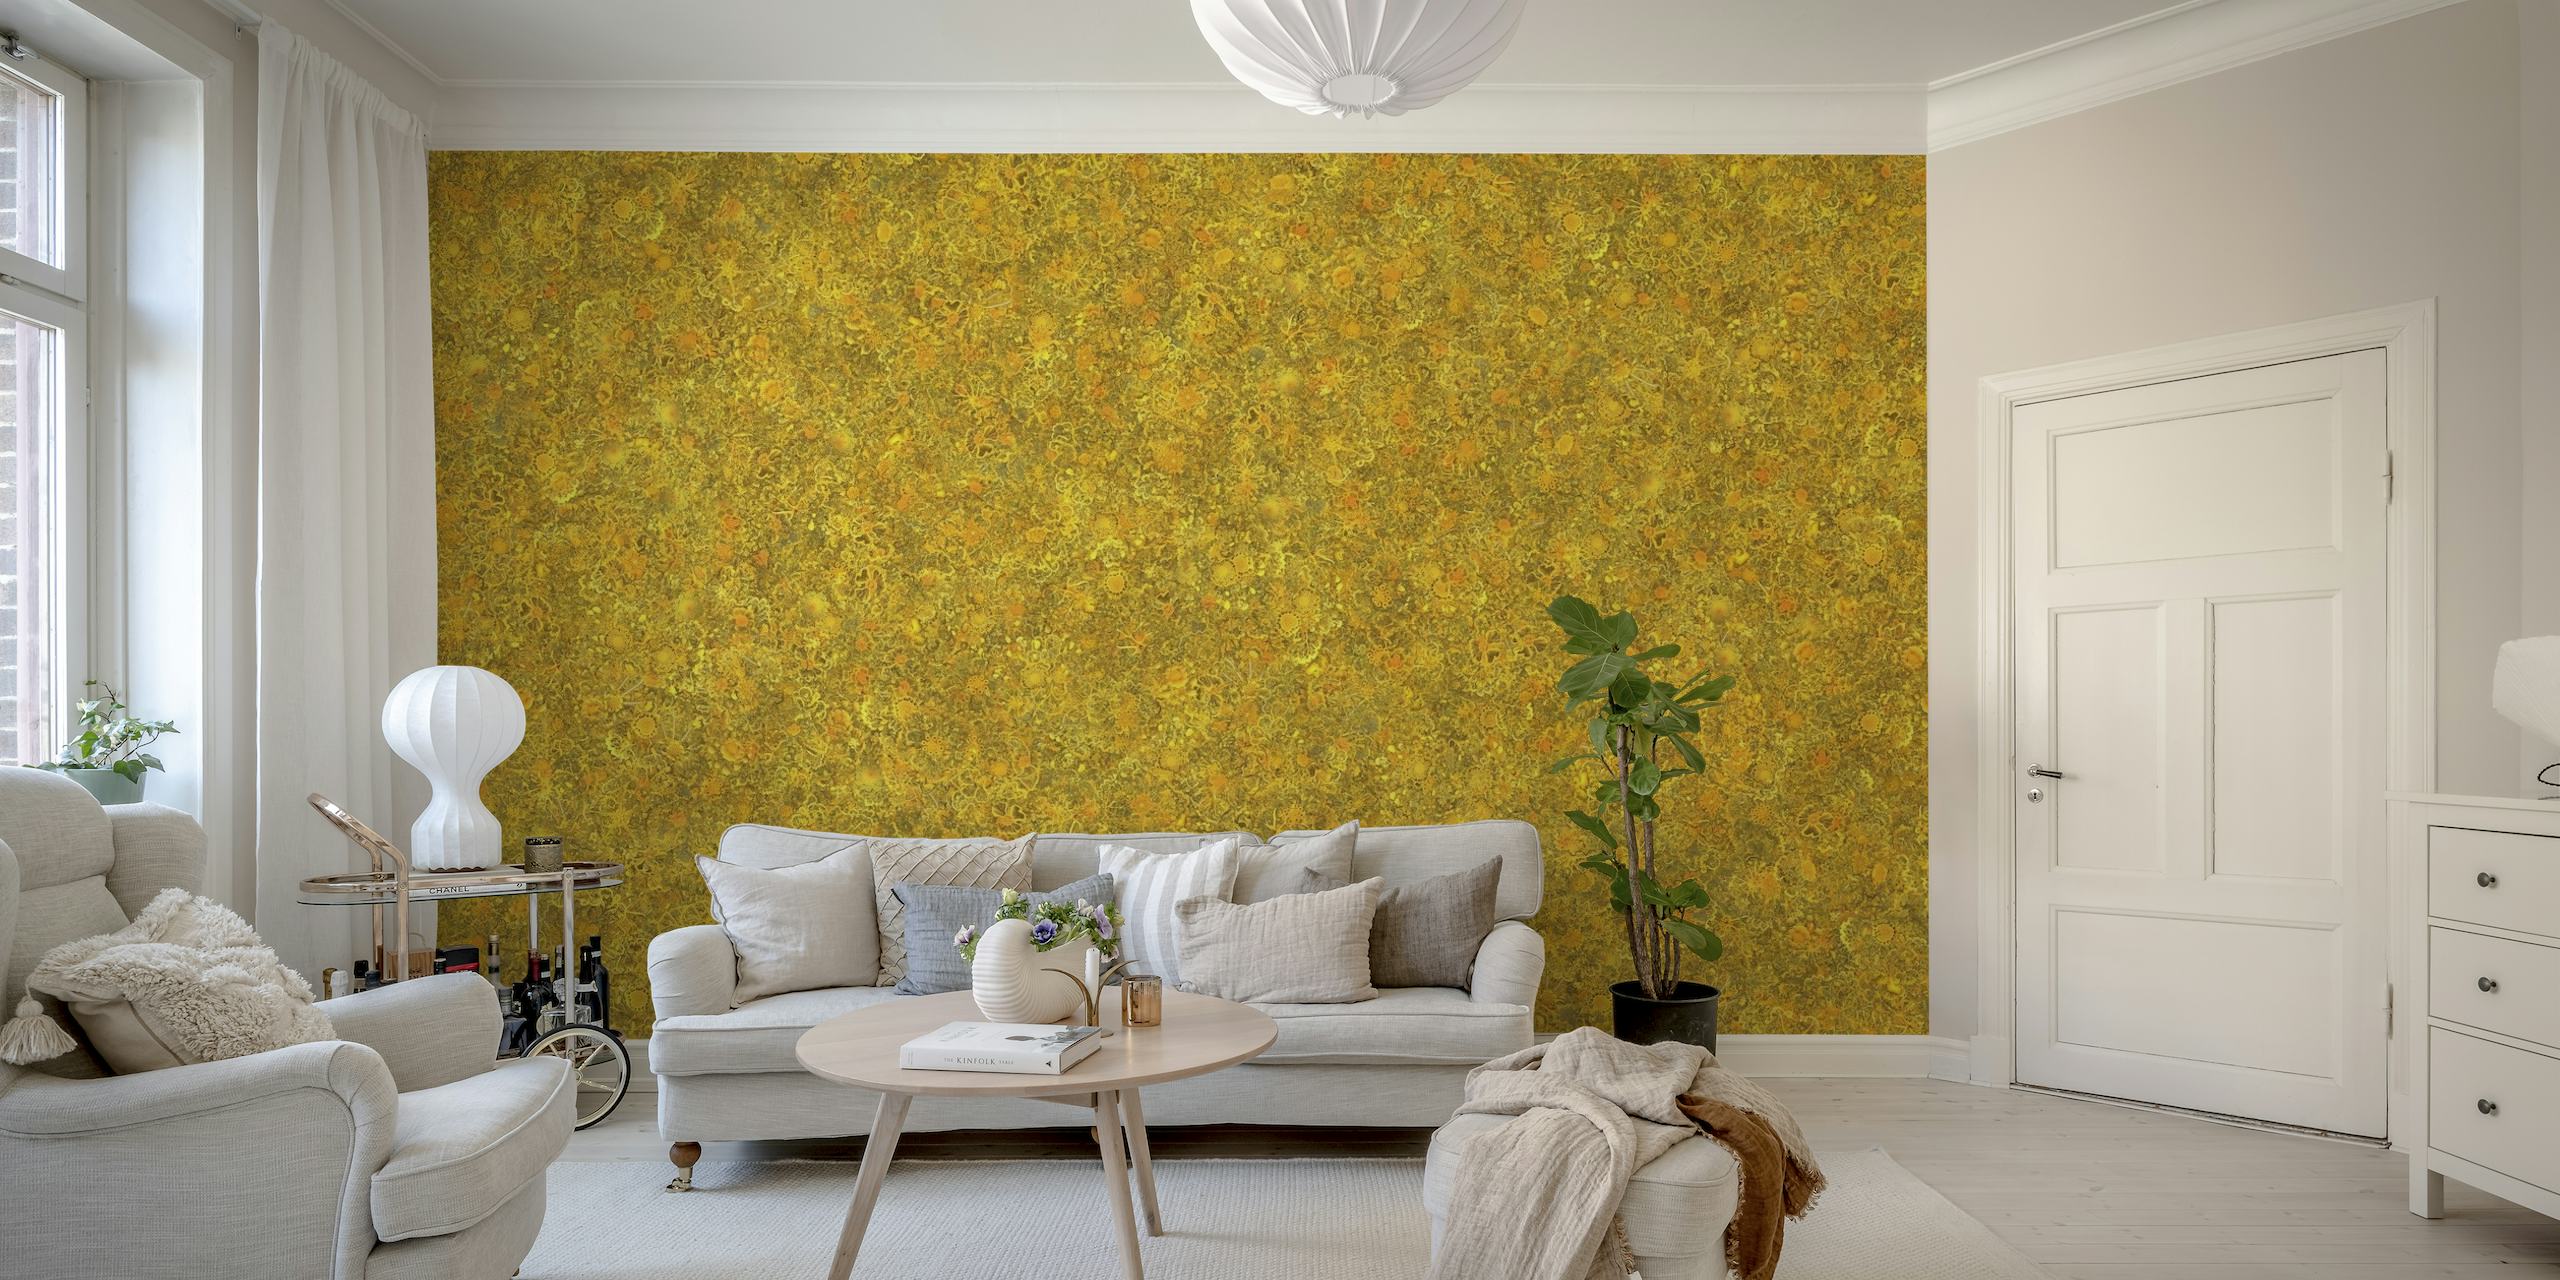 Embroidery mycelium the power of nature yellow wallpaper